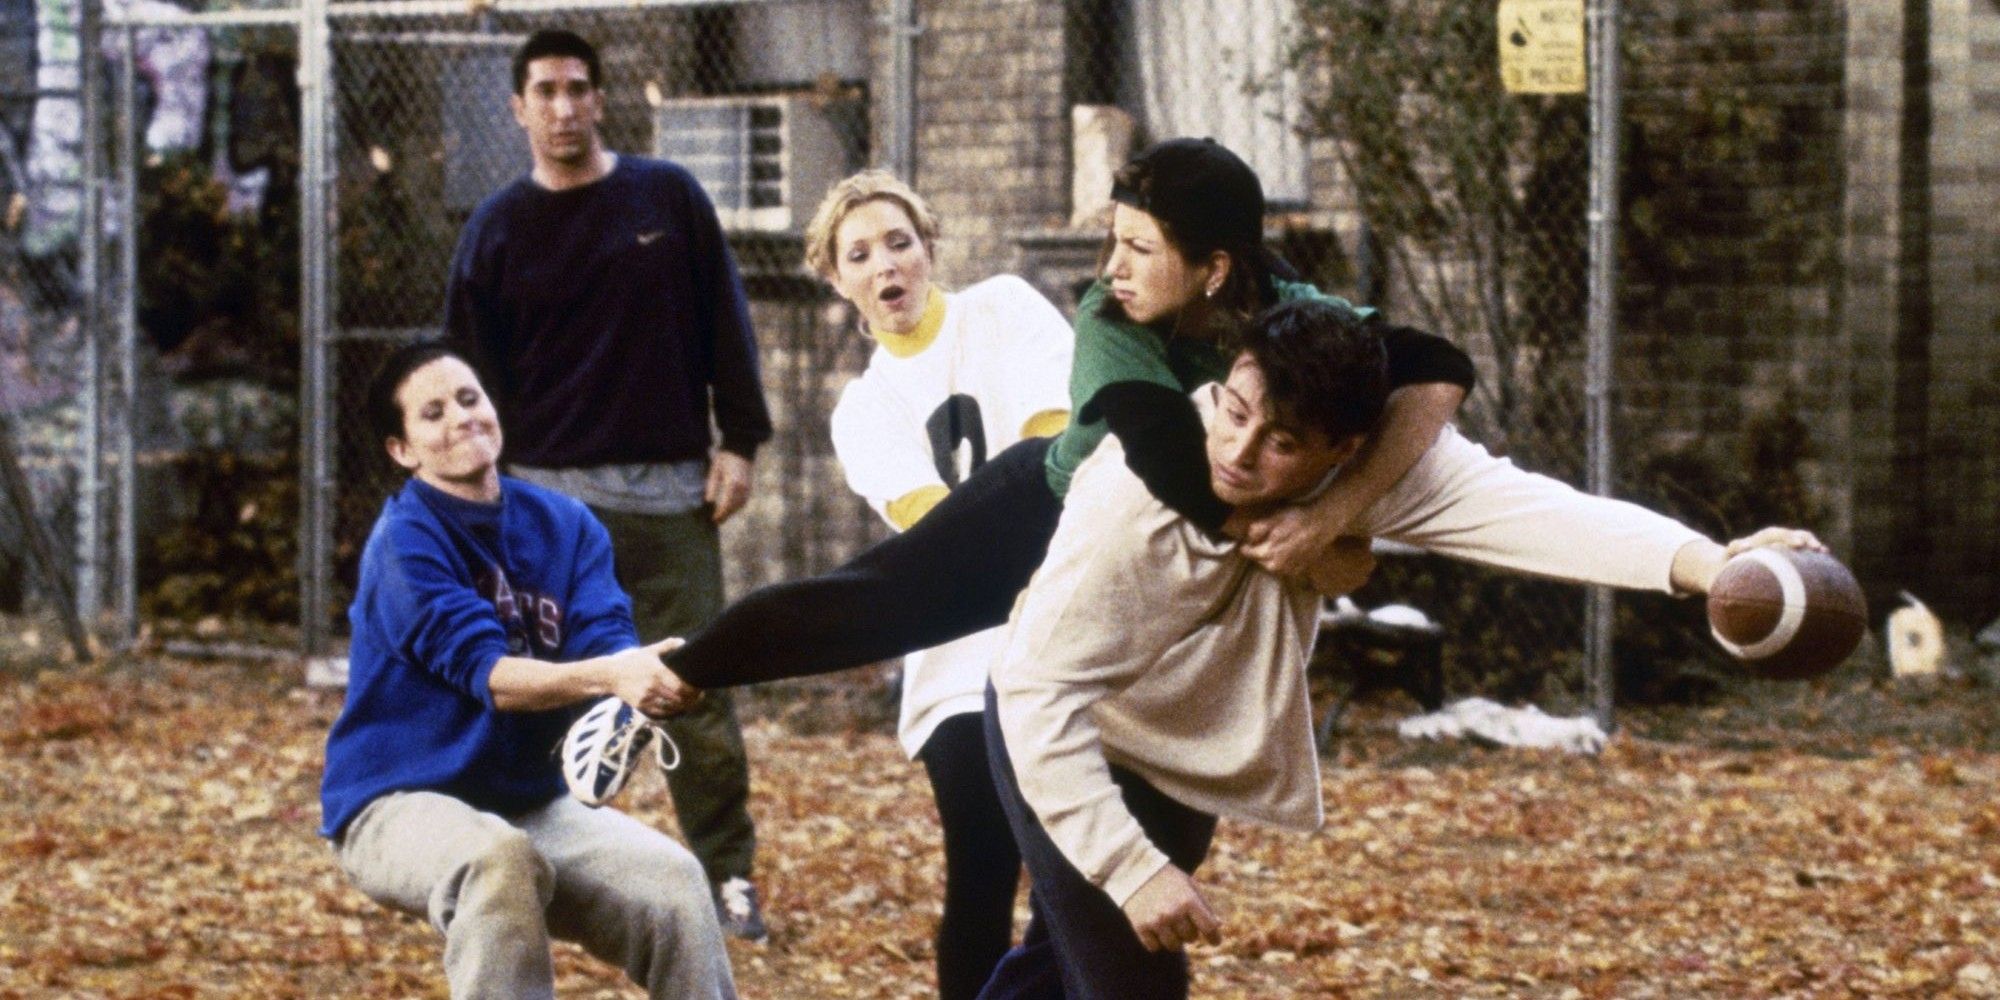 Rachel, Monica and Phoebe try to stop Joey from scoring in a game of football in Friends